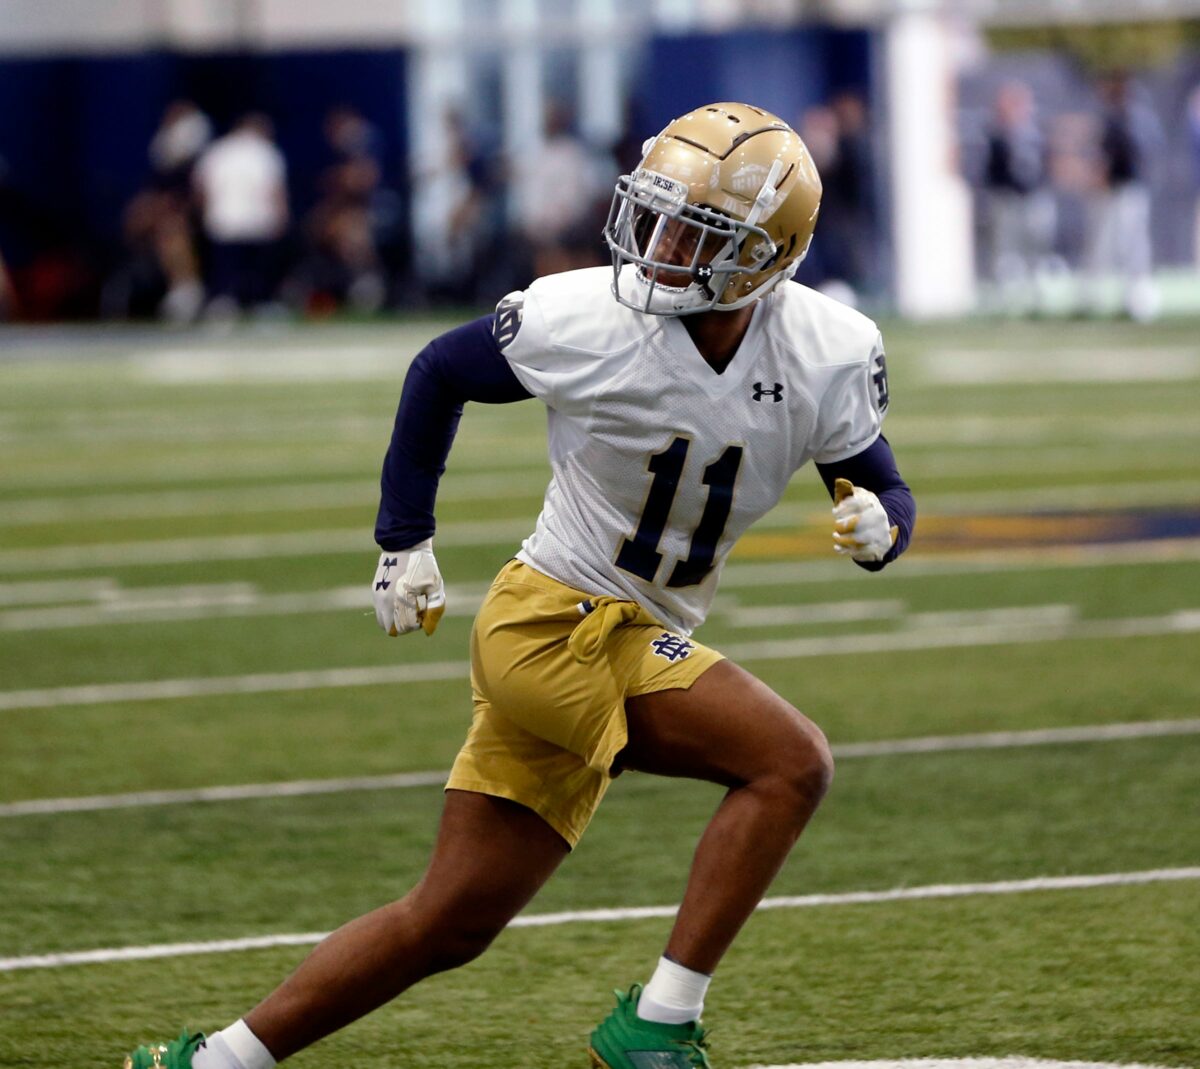 Notre Dame sees its first player enter the portal post-spring practices